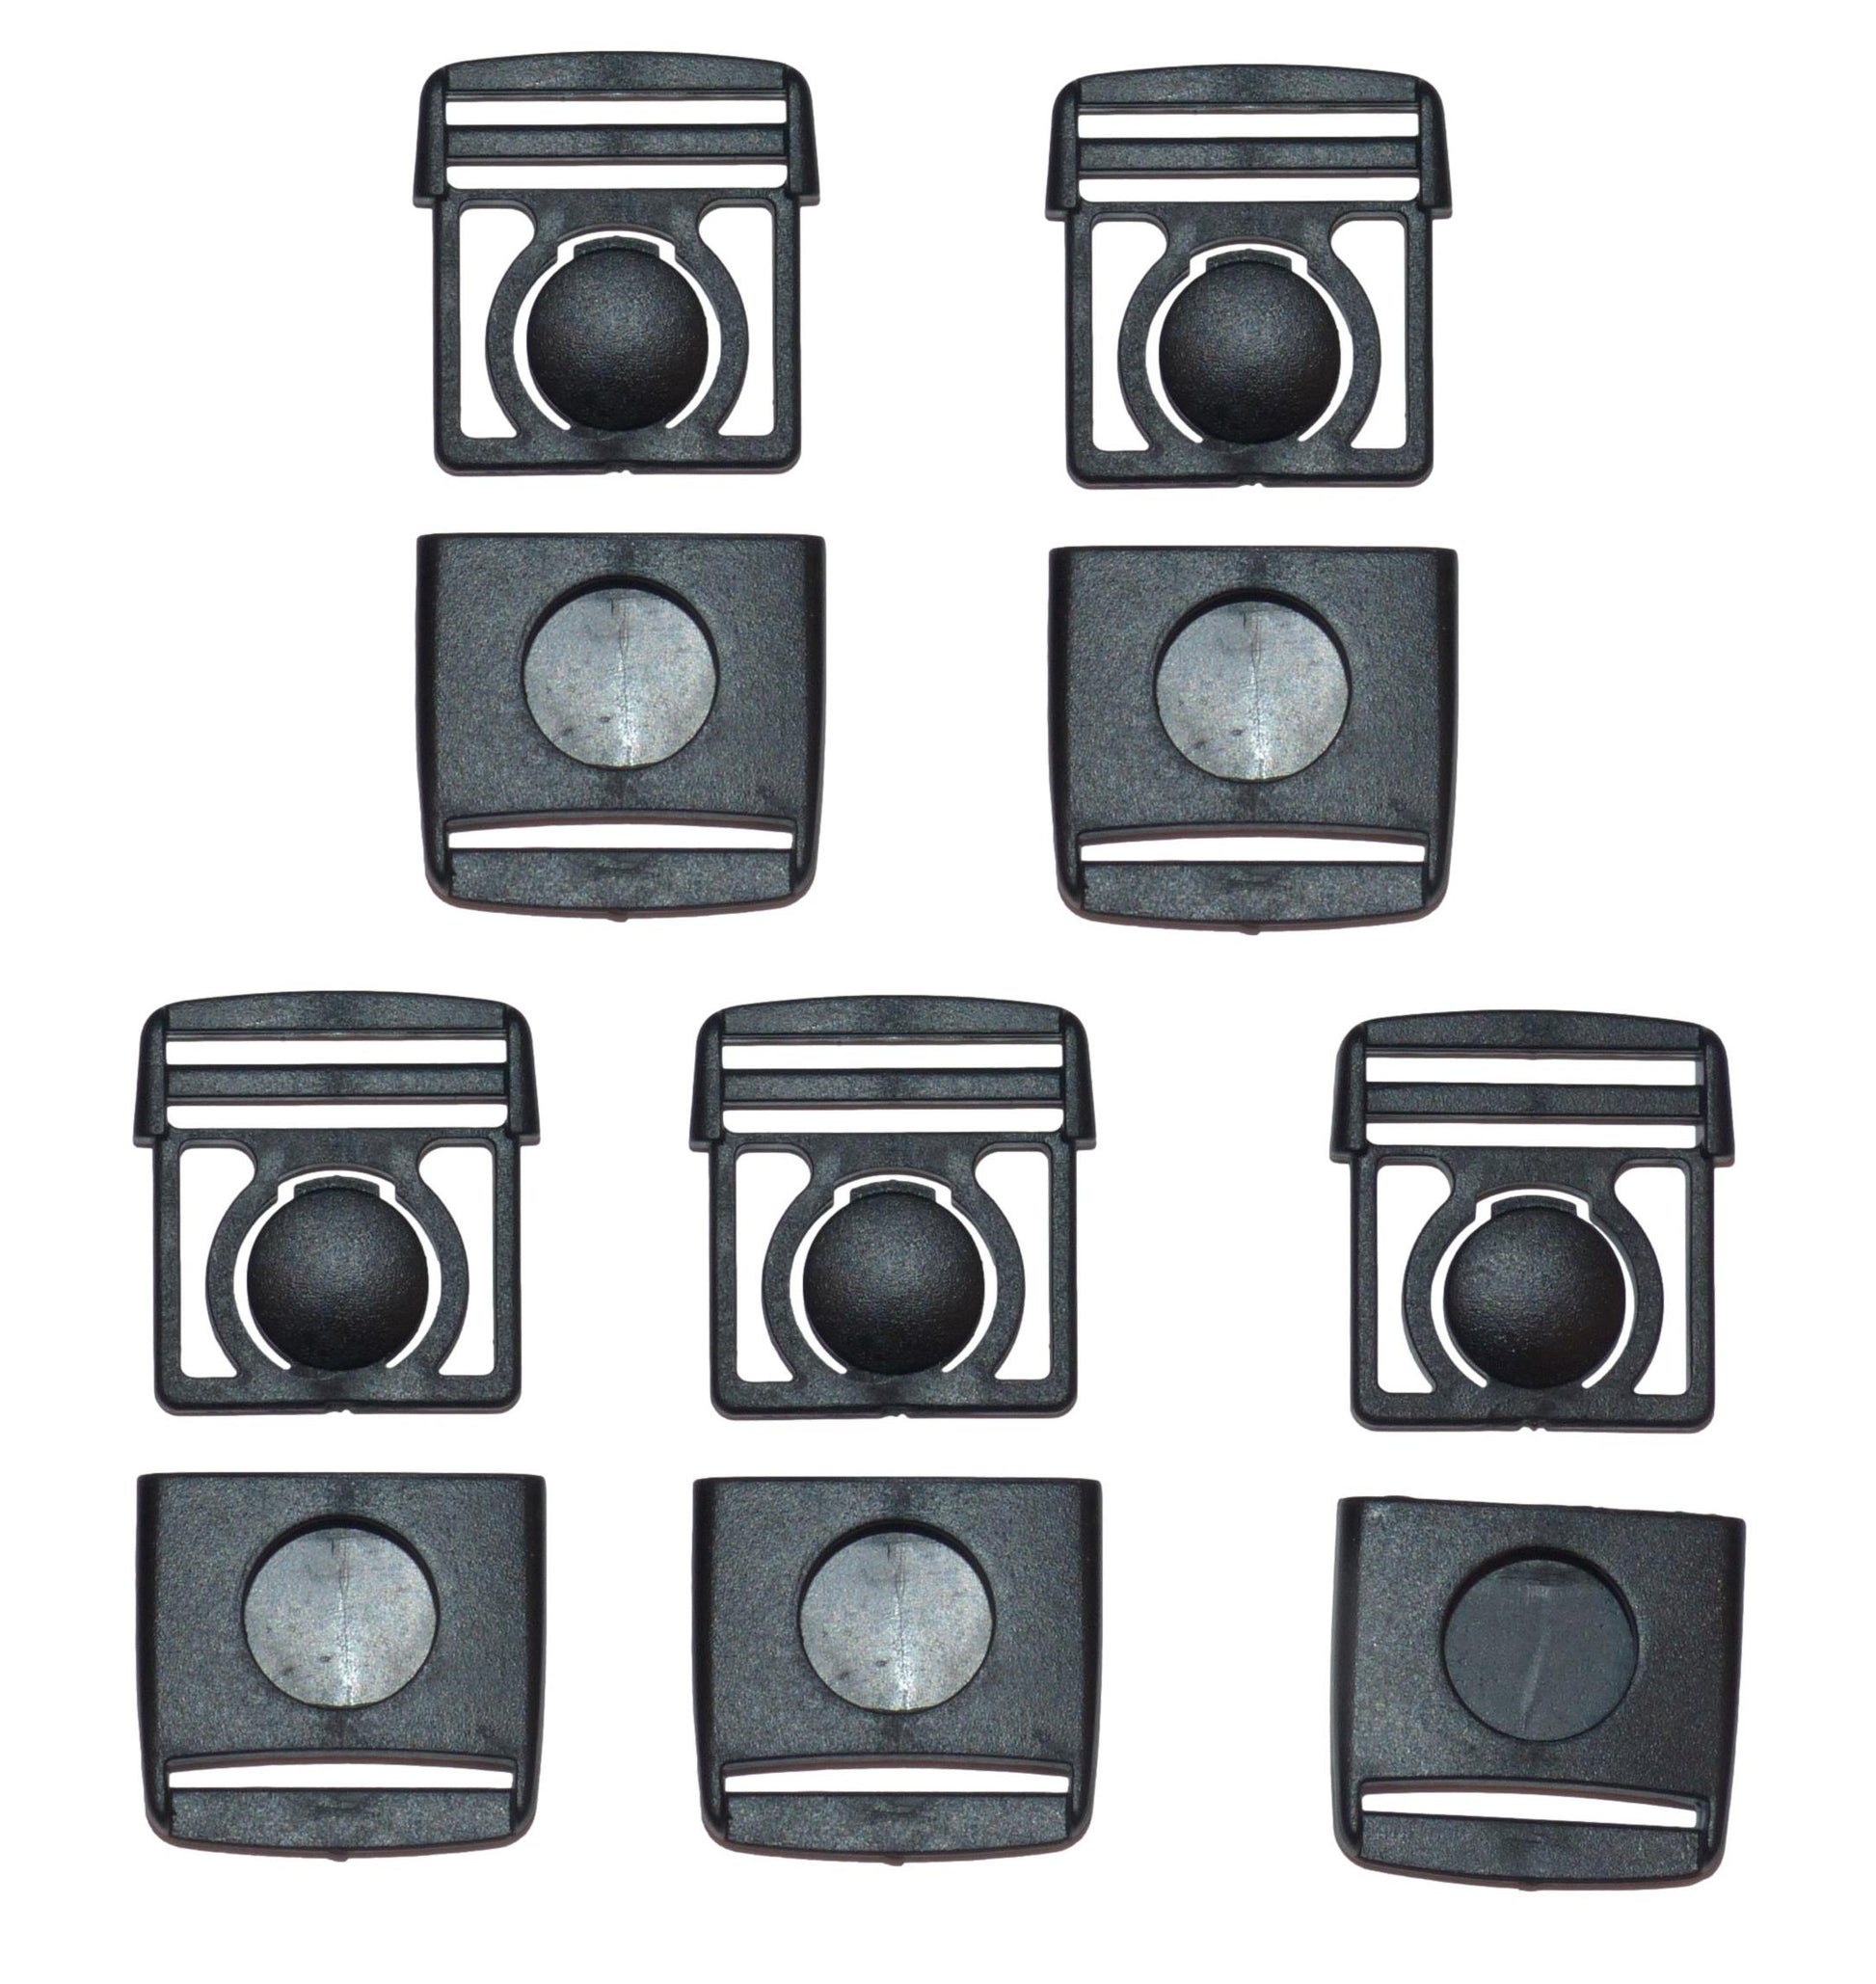 Benristraps 25mm button centre release buckle (pack of 5) (open)